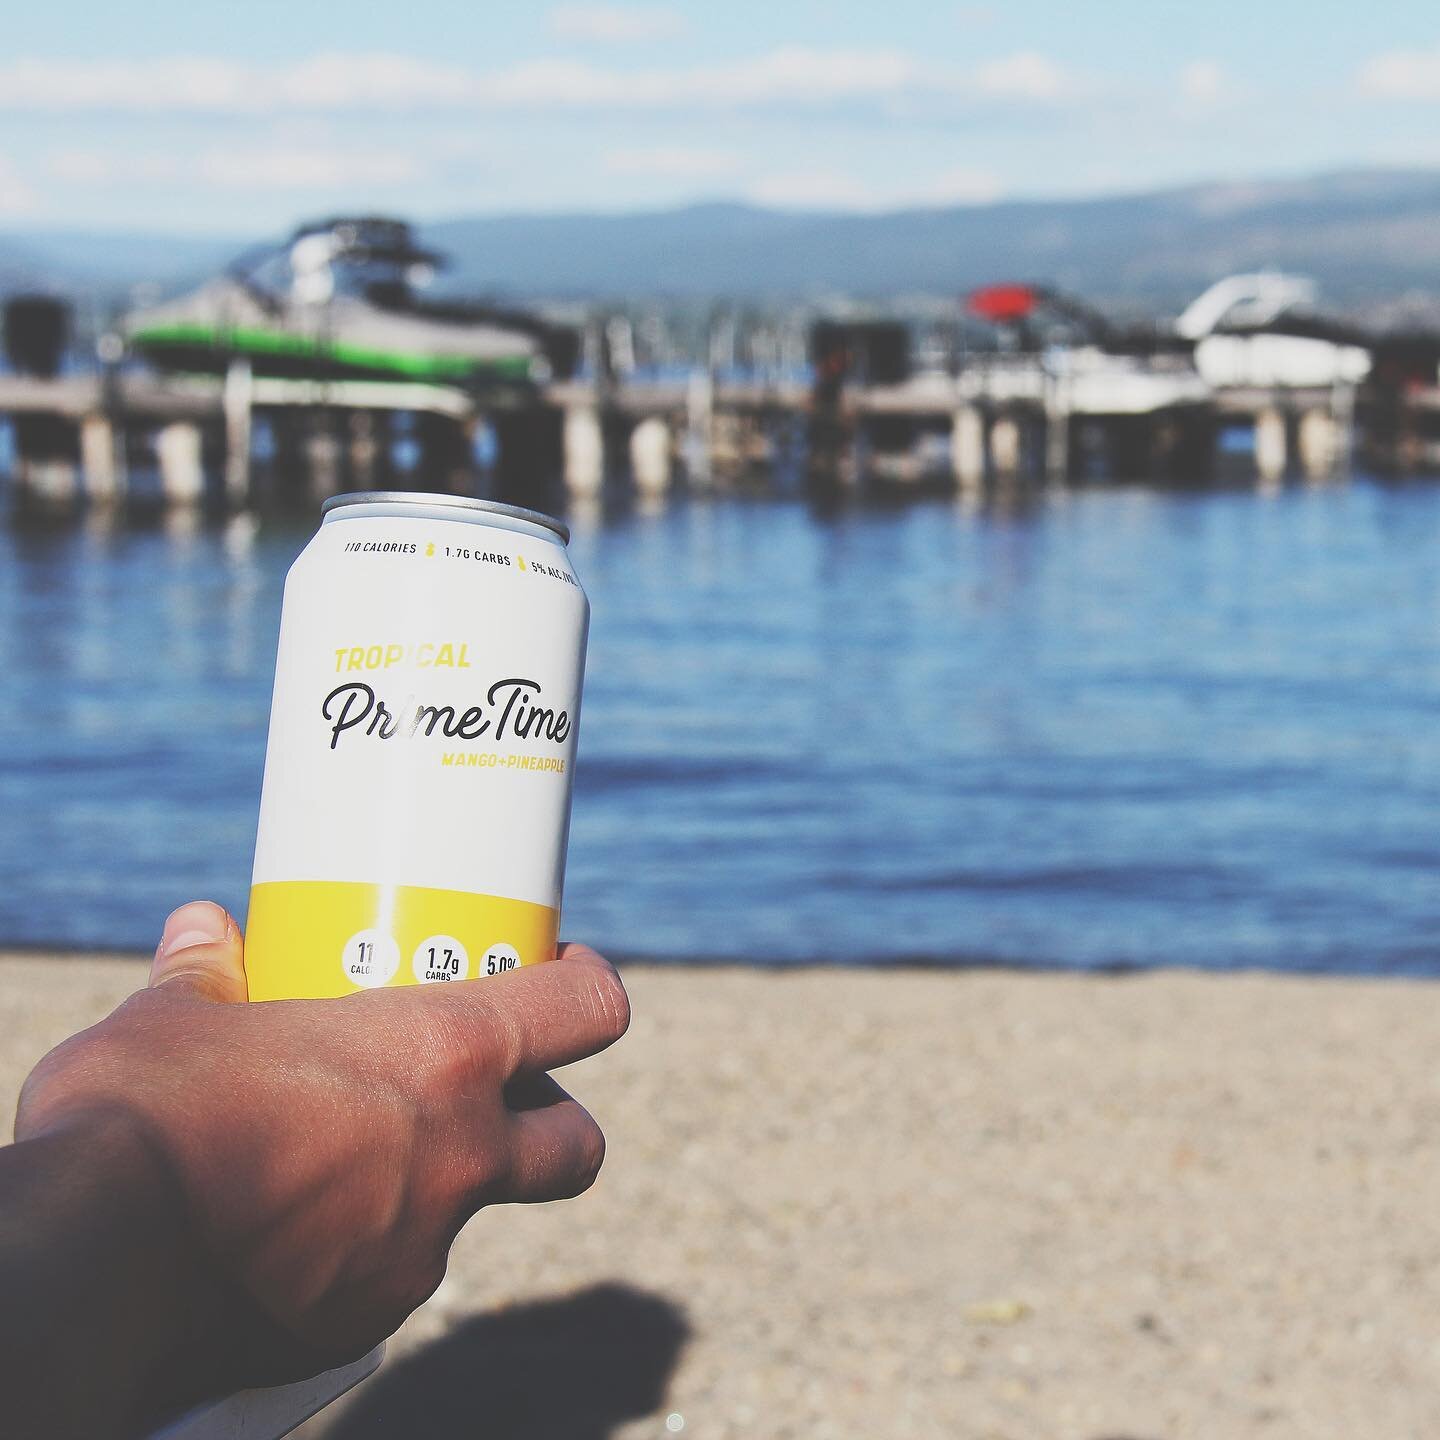 Happy #humpday !! 

Anyone else excited to hit up the beach this weekend? 

#beer #beersofinstagram #beerstagram #craftbeer #craftbeerlife #craftbeerporn #yvr #yvrfoodie #foodie #foodiesofinstagram #foodies #vancouverbeer #vancouver #vancity #dailyhi